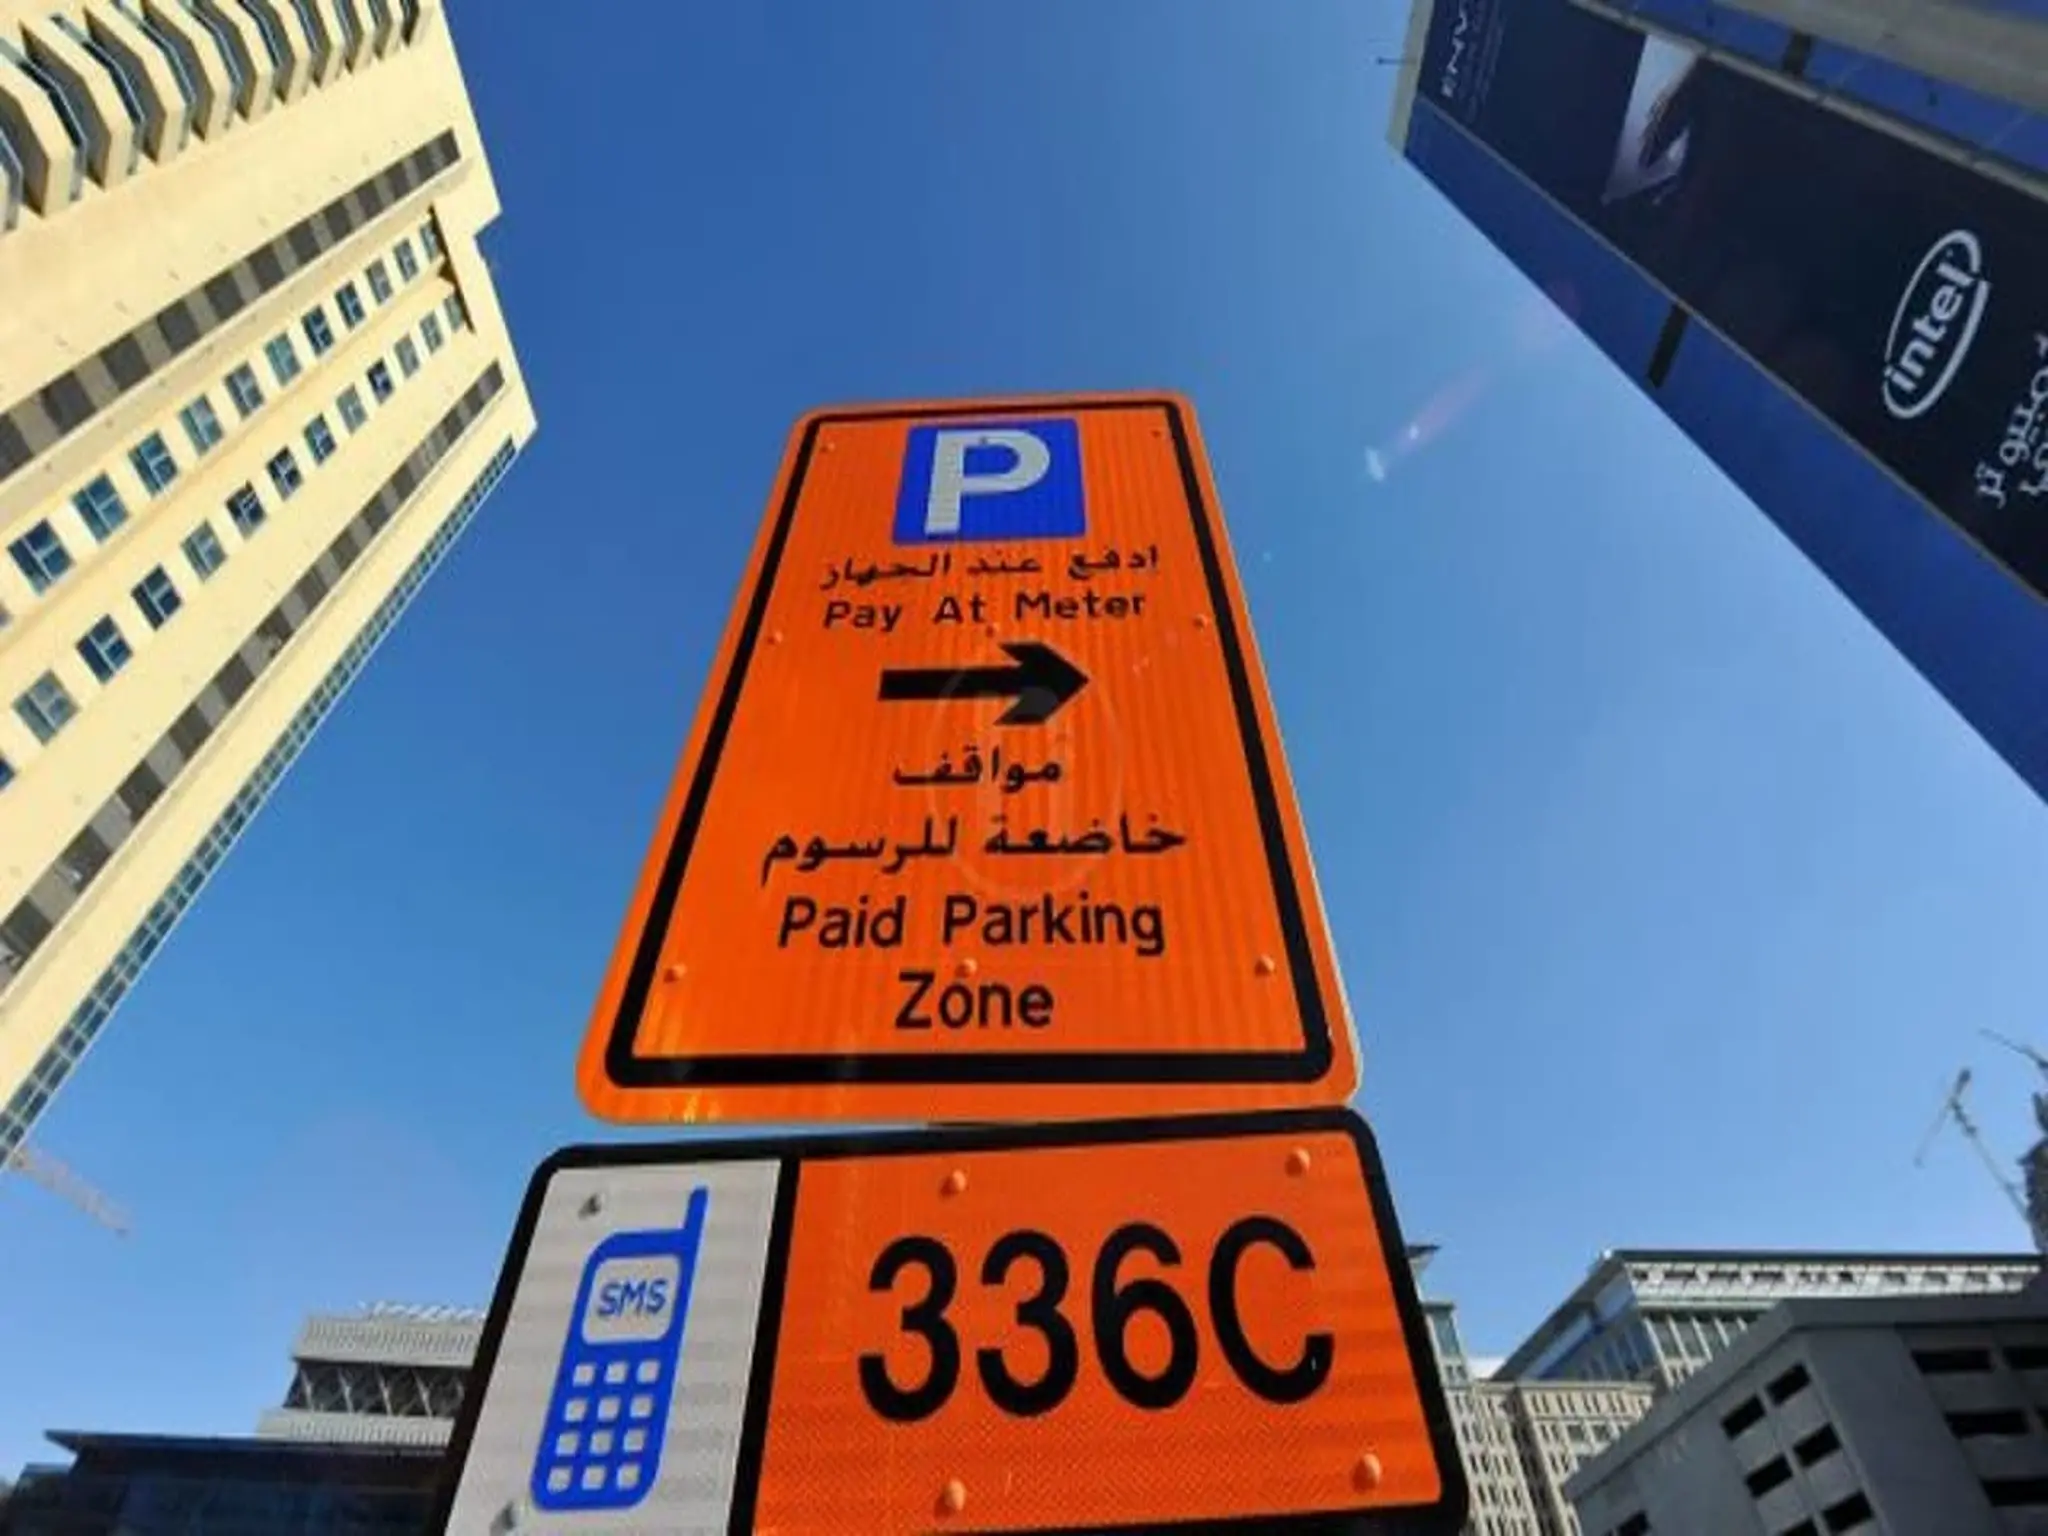 The UAE announces free parking on the occasion of New Year and its locations